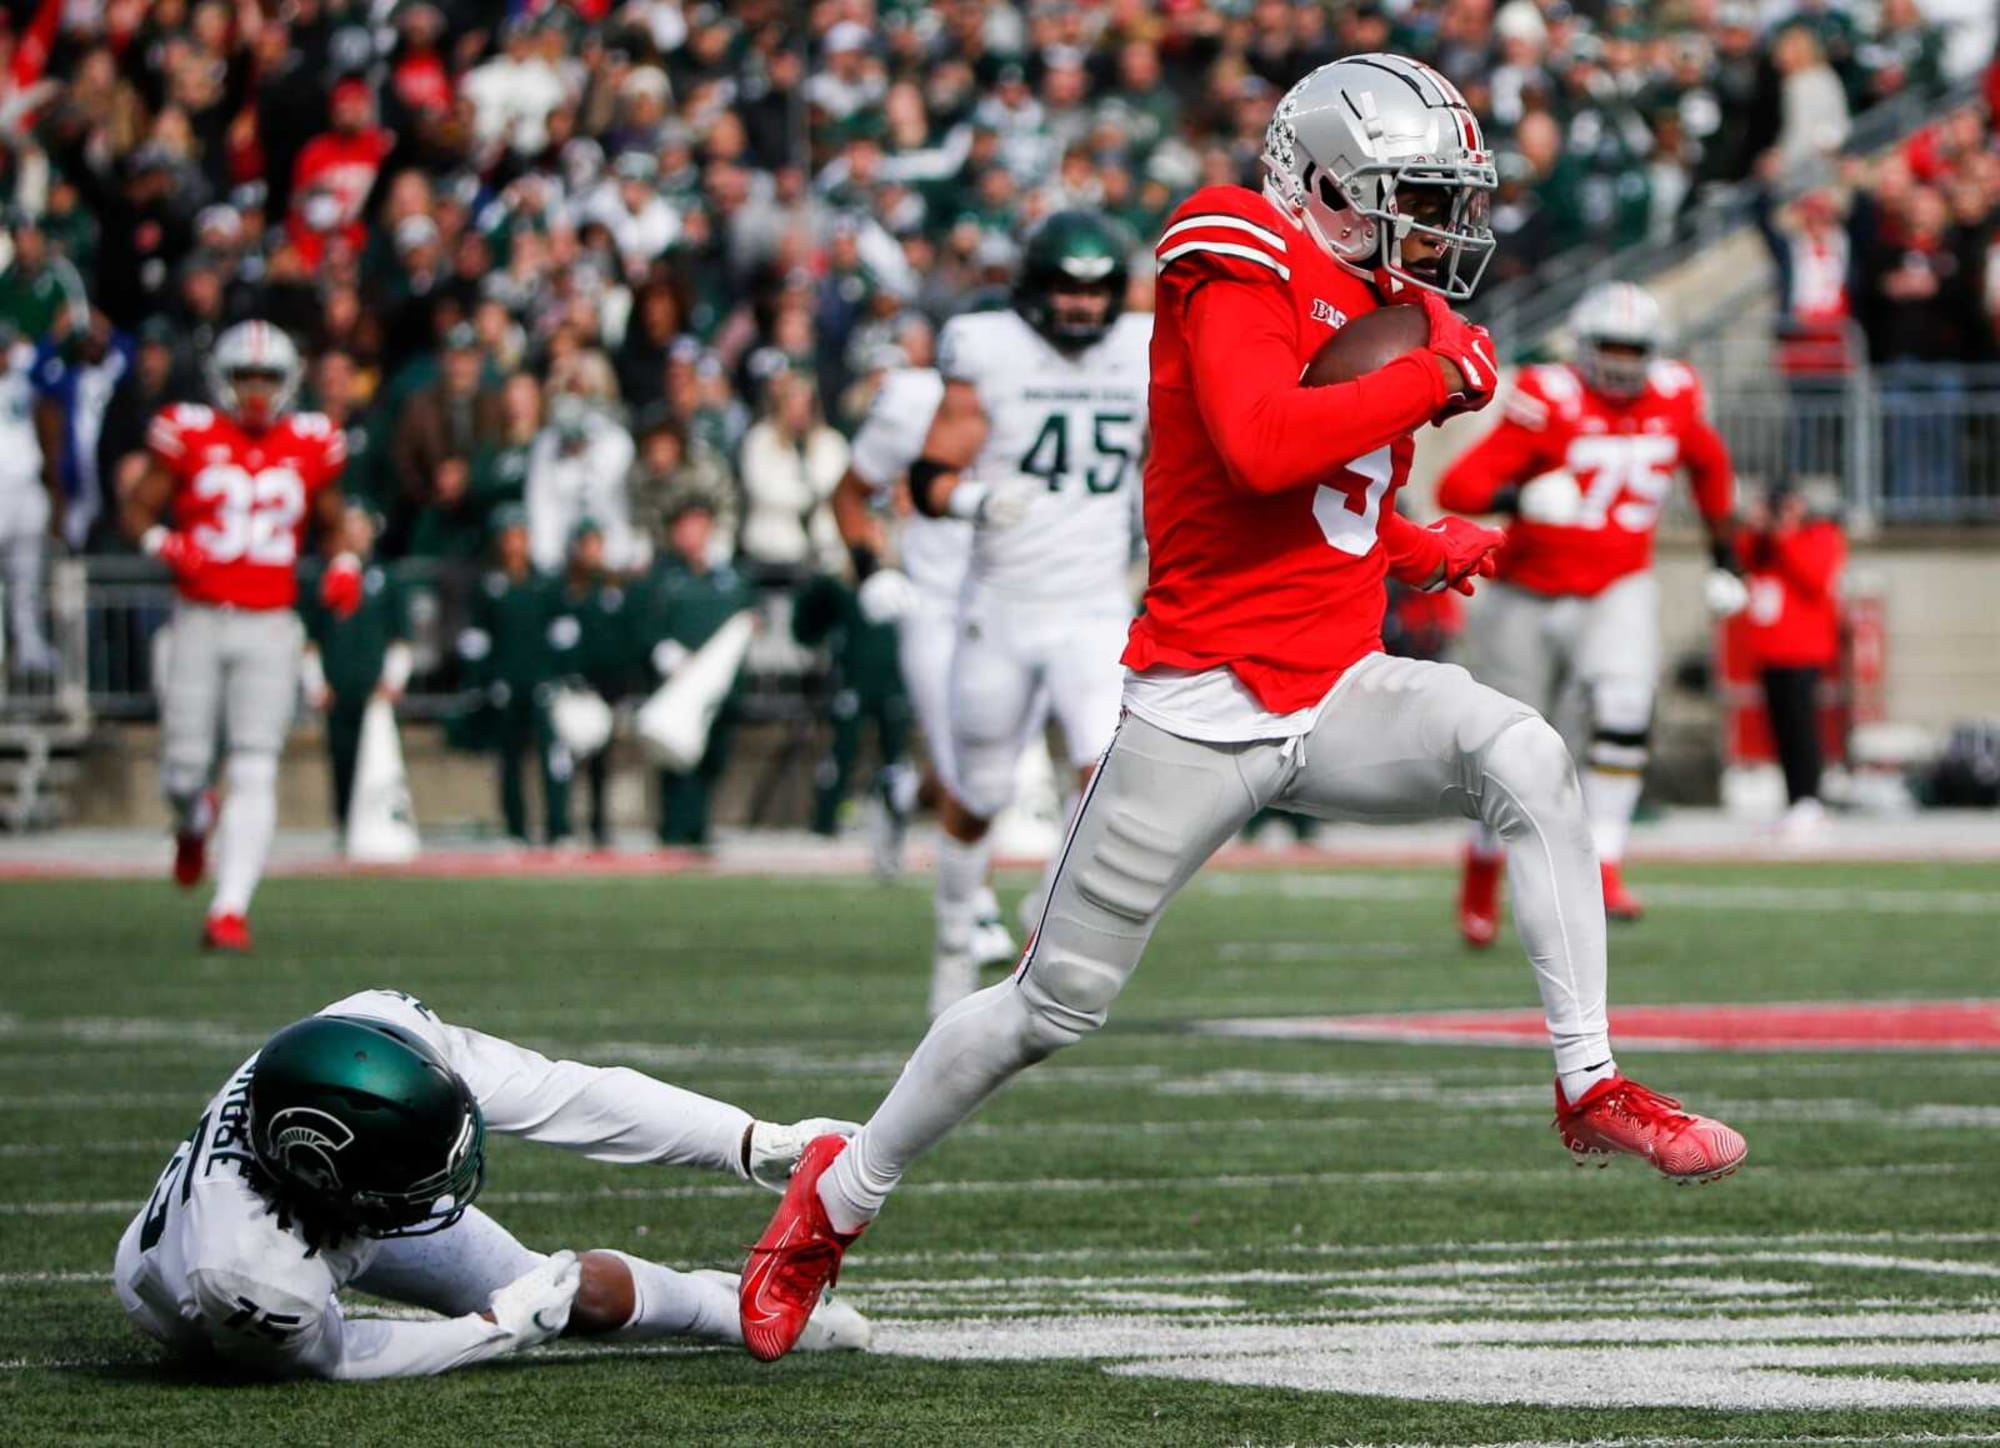 Ohio State Football shows they are truly a national title contender